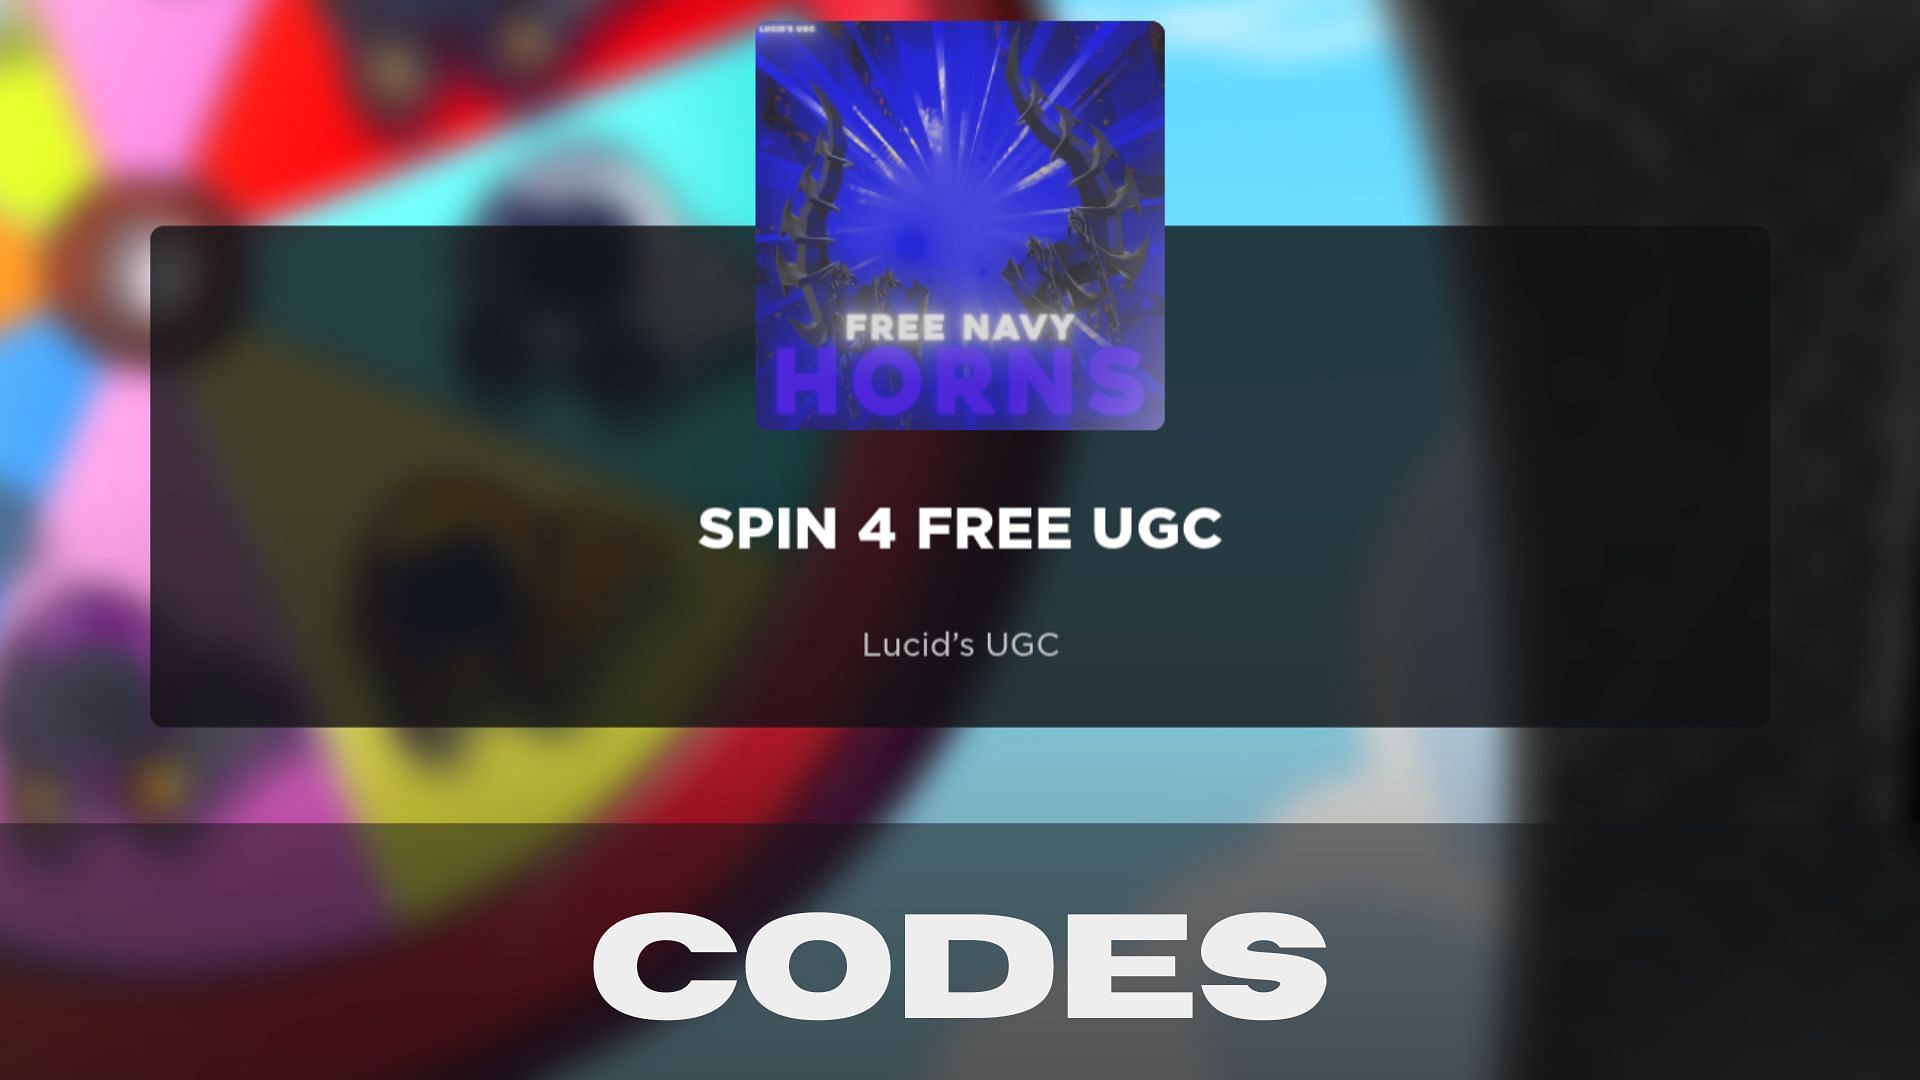 Use the Spin 4 Free UGC codes to get free Spins and Luck boosters